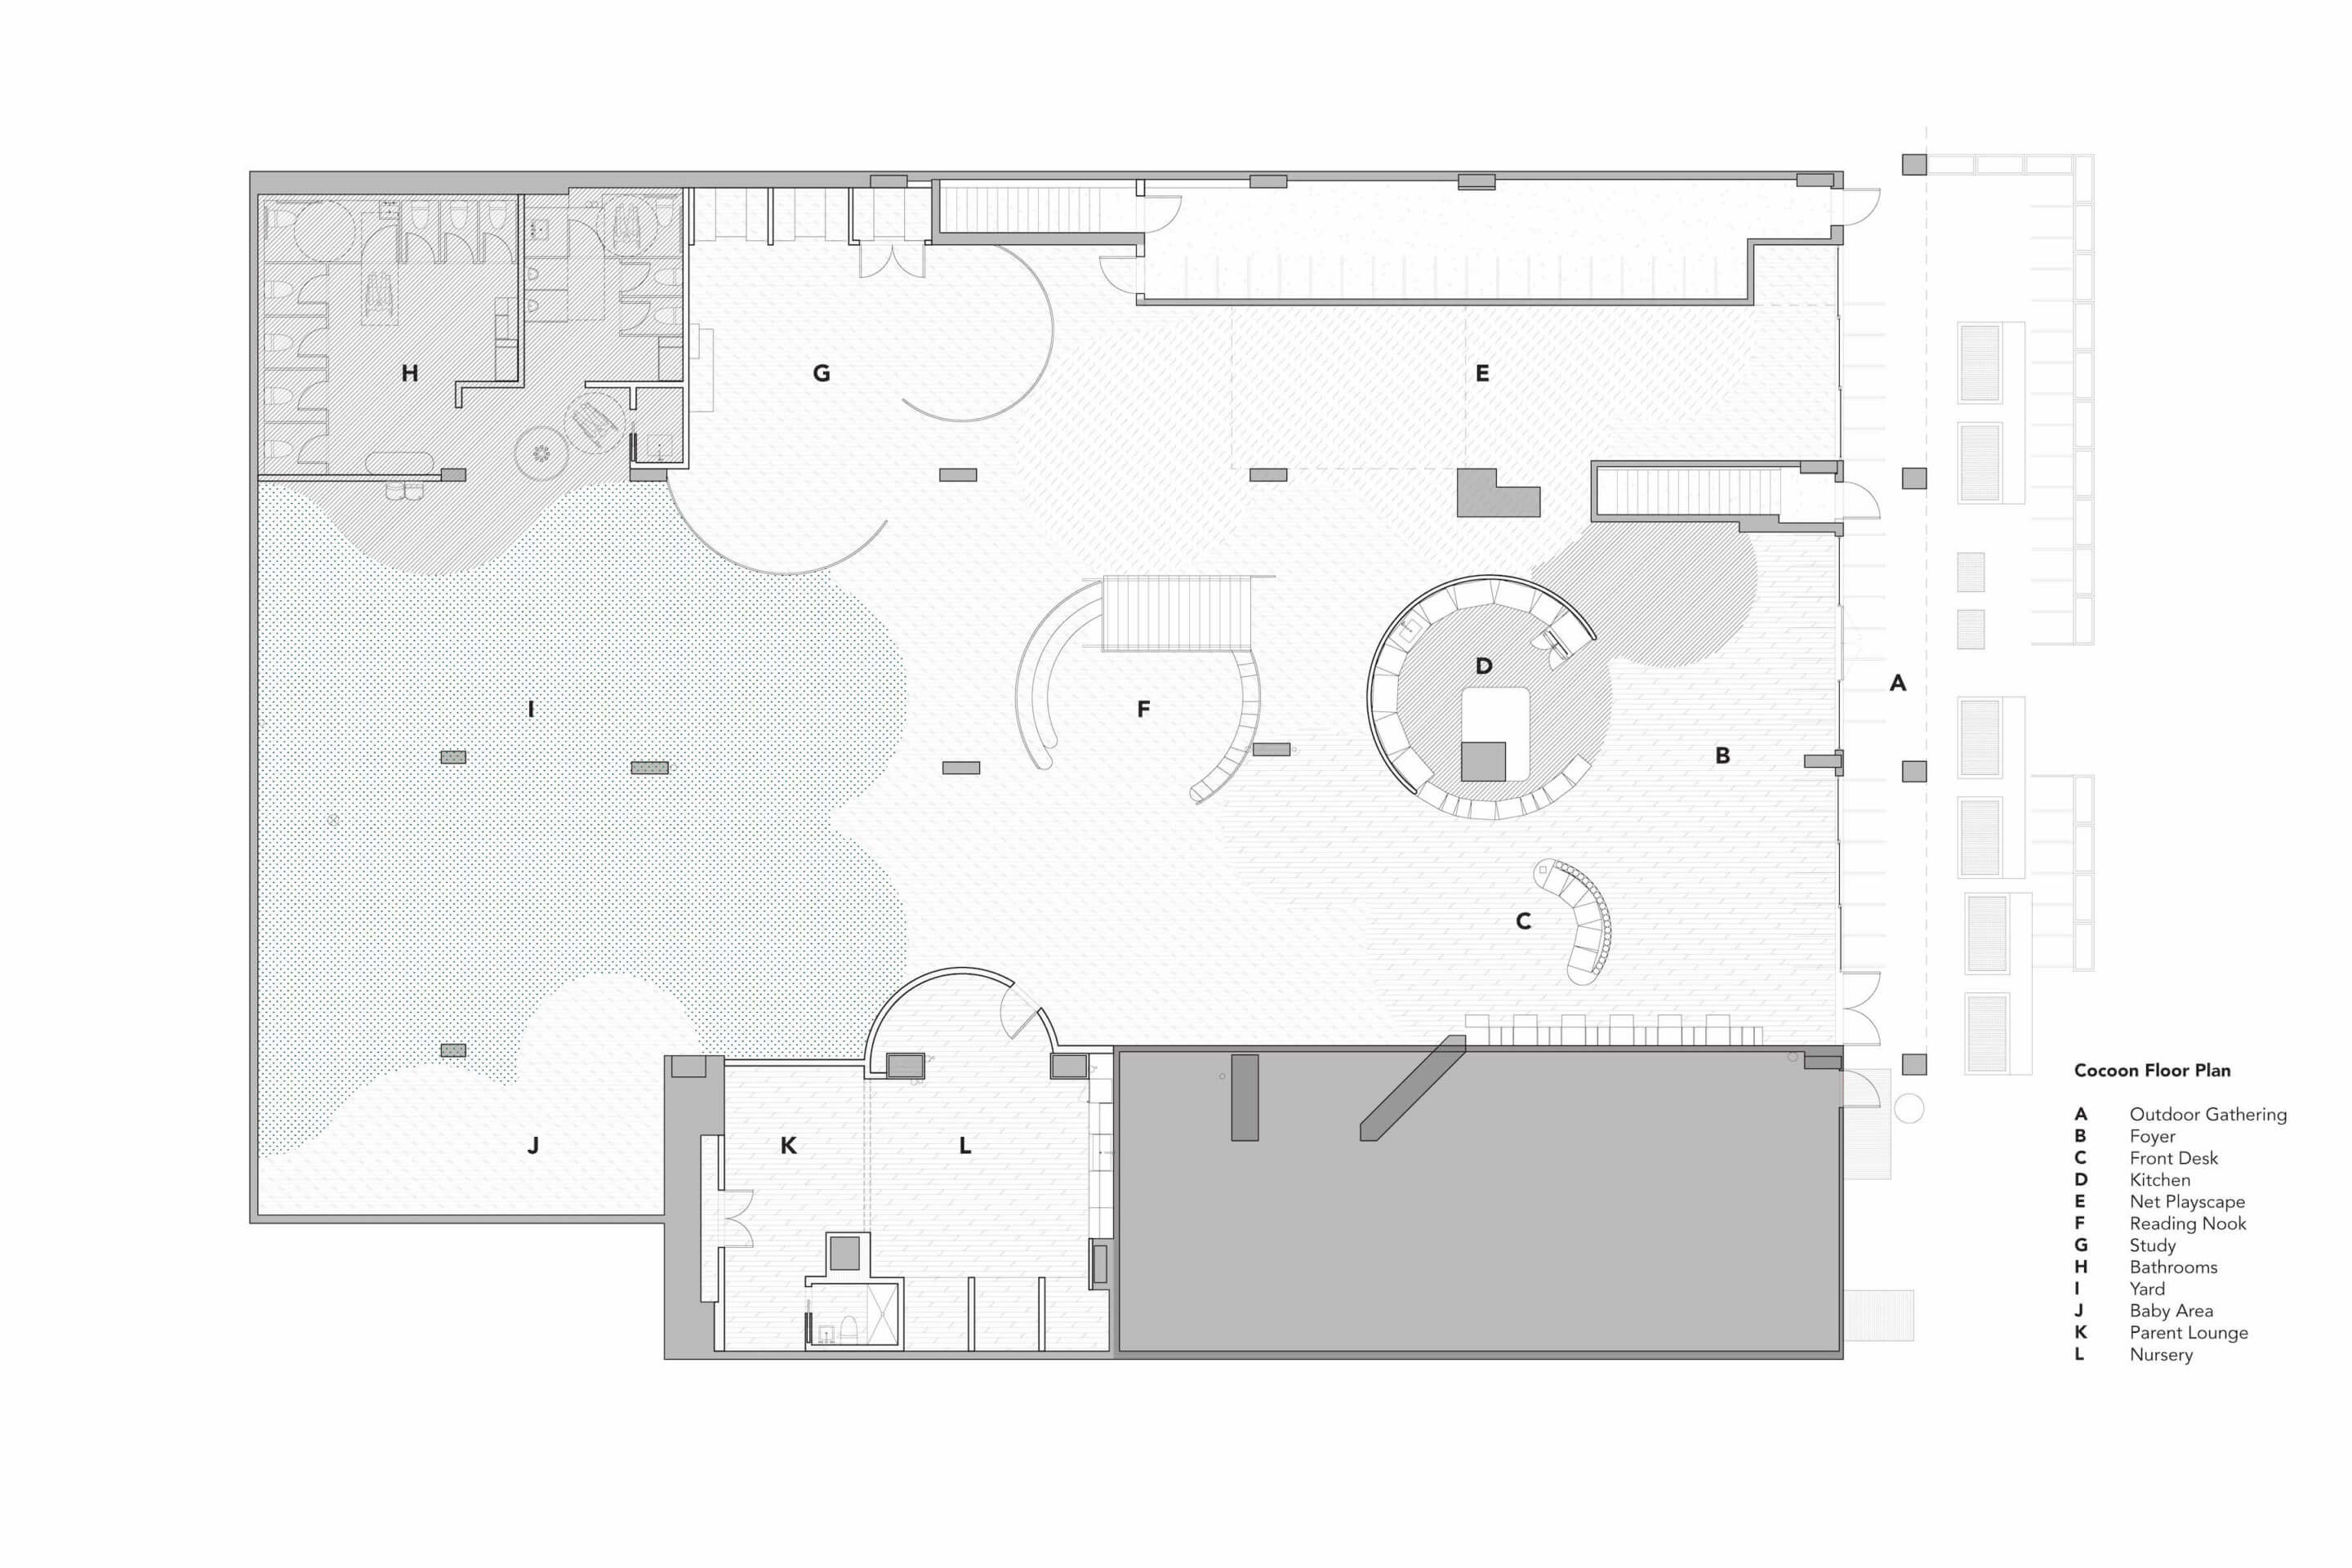 ground floor plan of a play scape with most of it dedicated to a big yard